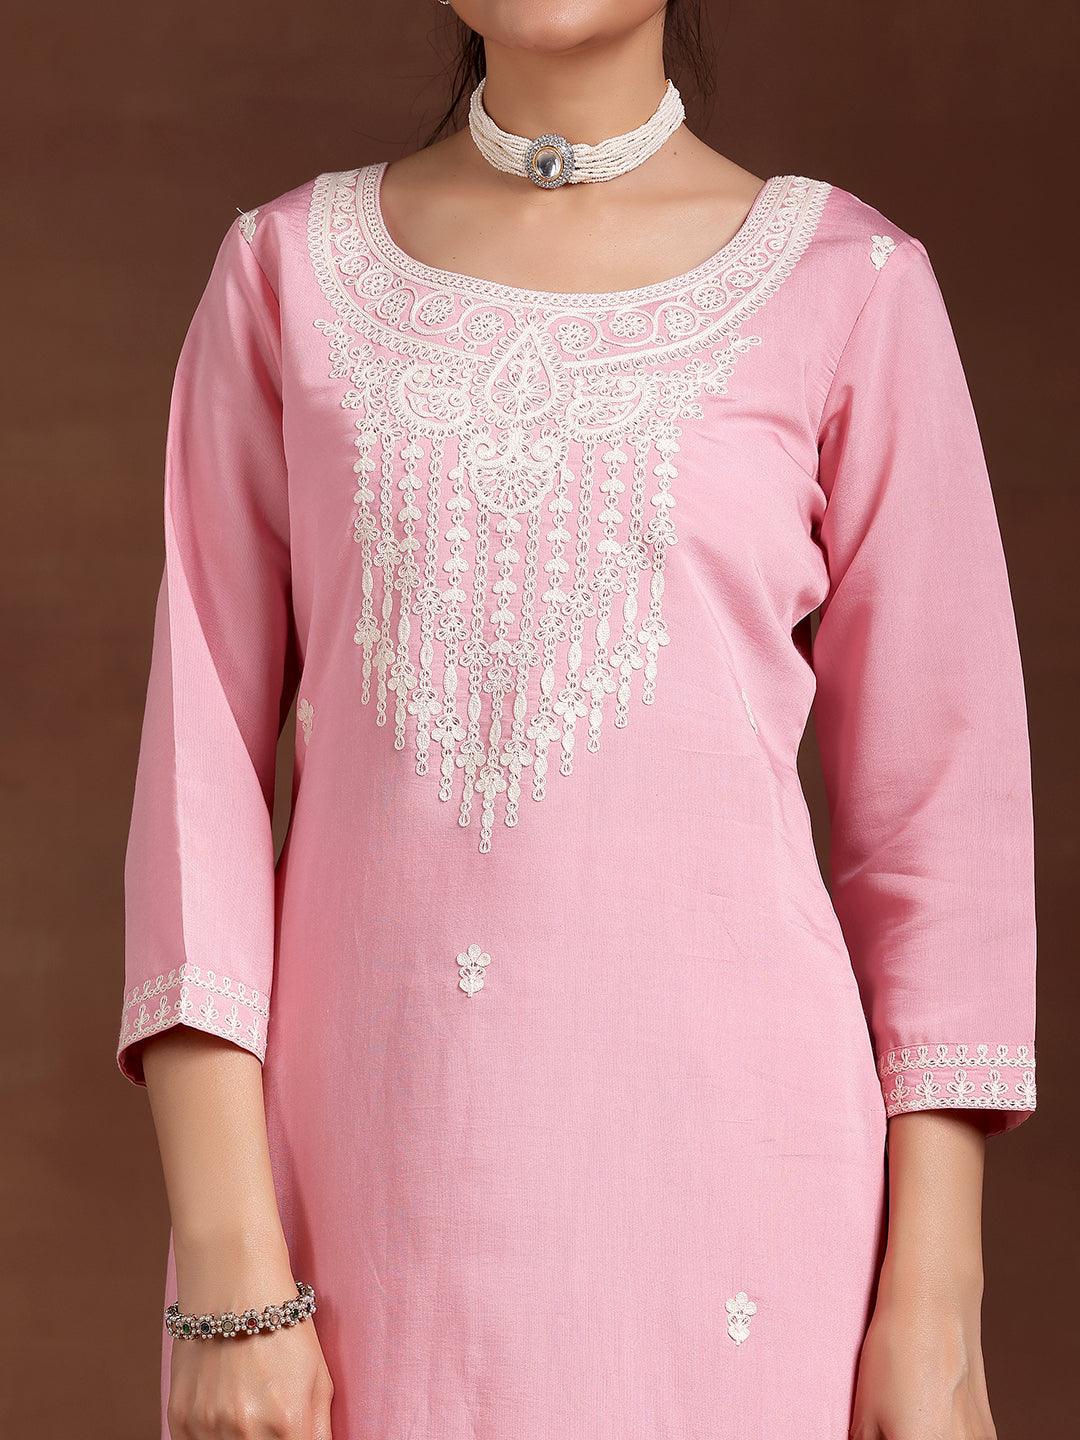 Pink Embroidered Silk Blend Straight Suit With Dupatta